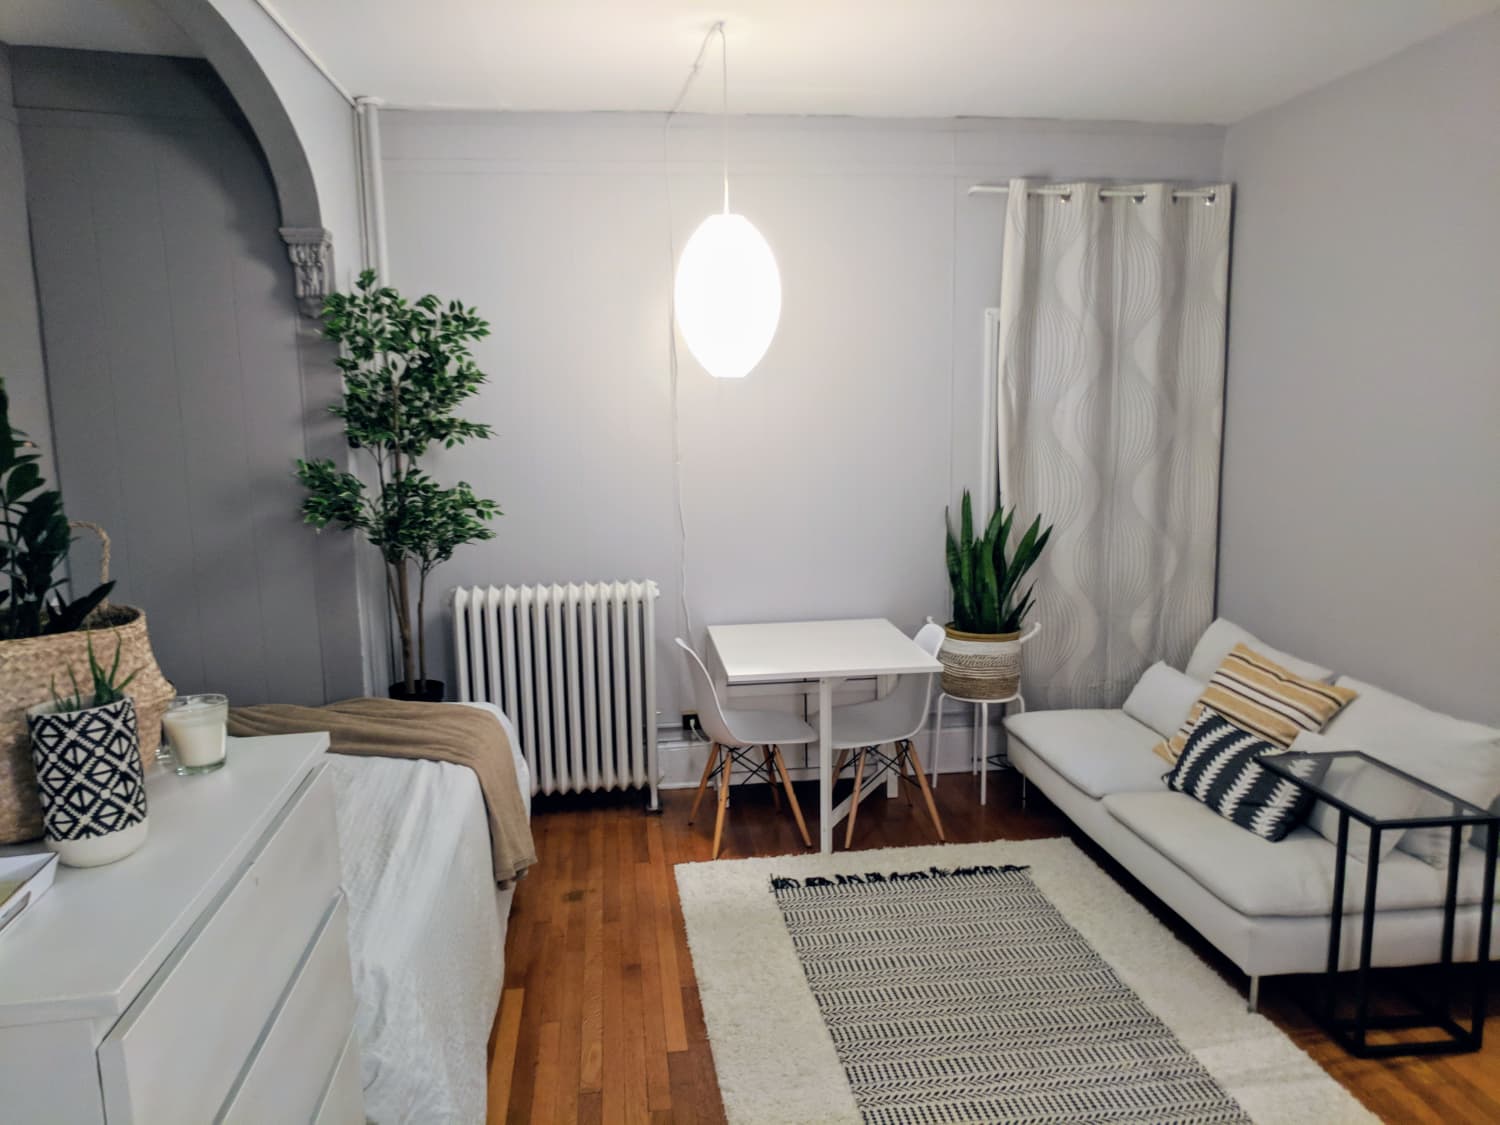 Tiny Space Living in a New York Studio Apartment ...